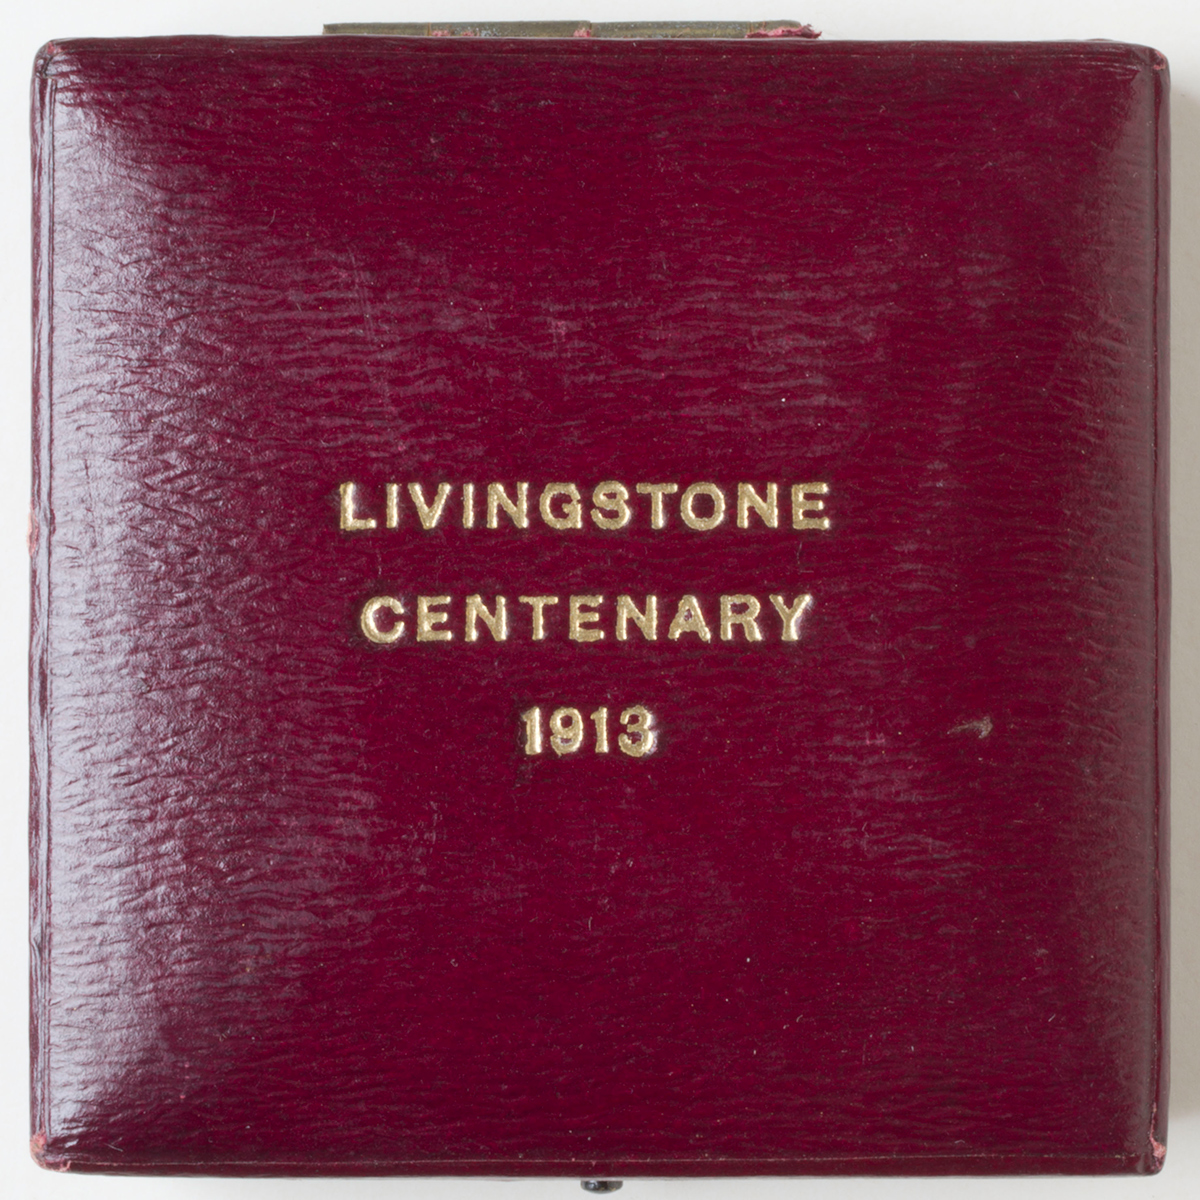 Presentation box containing David Livingstone Centenary Coin, 1913. Copyright David Livingstone Centre. Object images used by permission. May not be reproduced without the express written consent of the National Trust for Scotland, on behalf of the Scottish National Memorial to David Livingstone Trust. Images of the objects from the David Livingstone Centre are copyright Roddy Simpson. Creative Commons Attribution-NonCommercial 3.0 Unported (https://creativecommons.org/licenses/by-nc/3.0/).